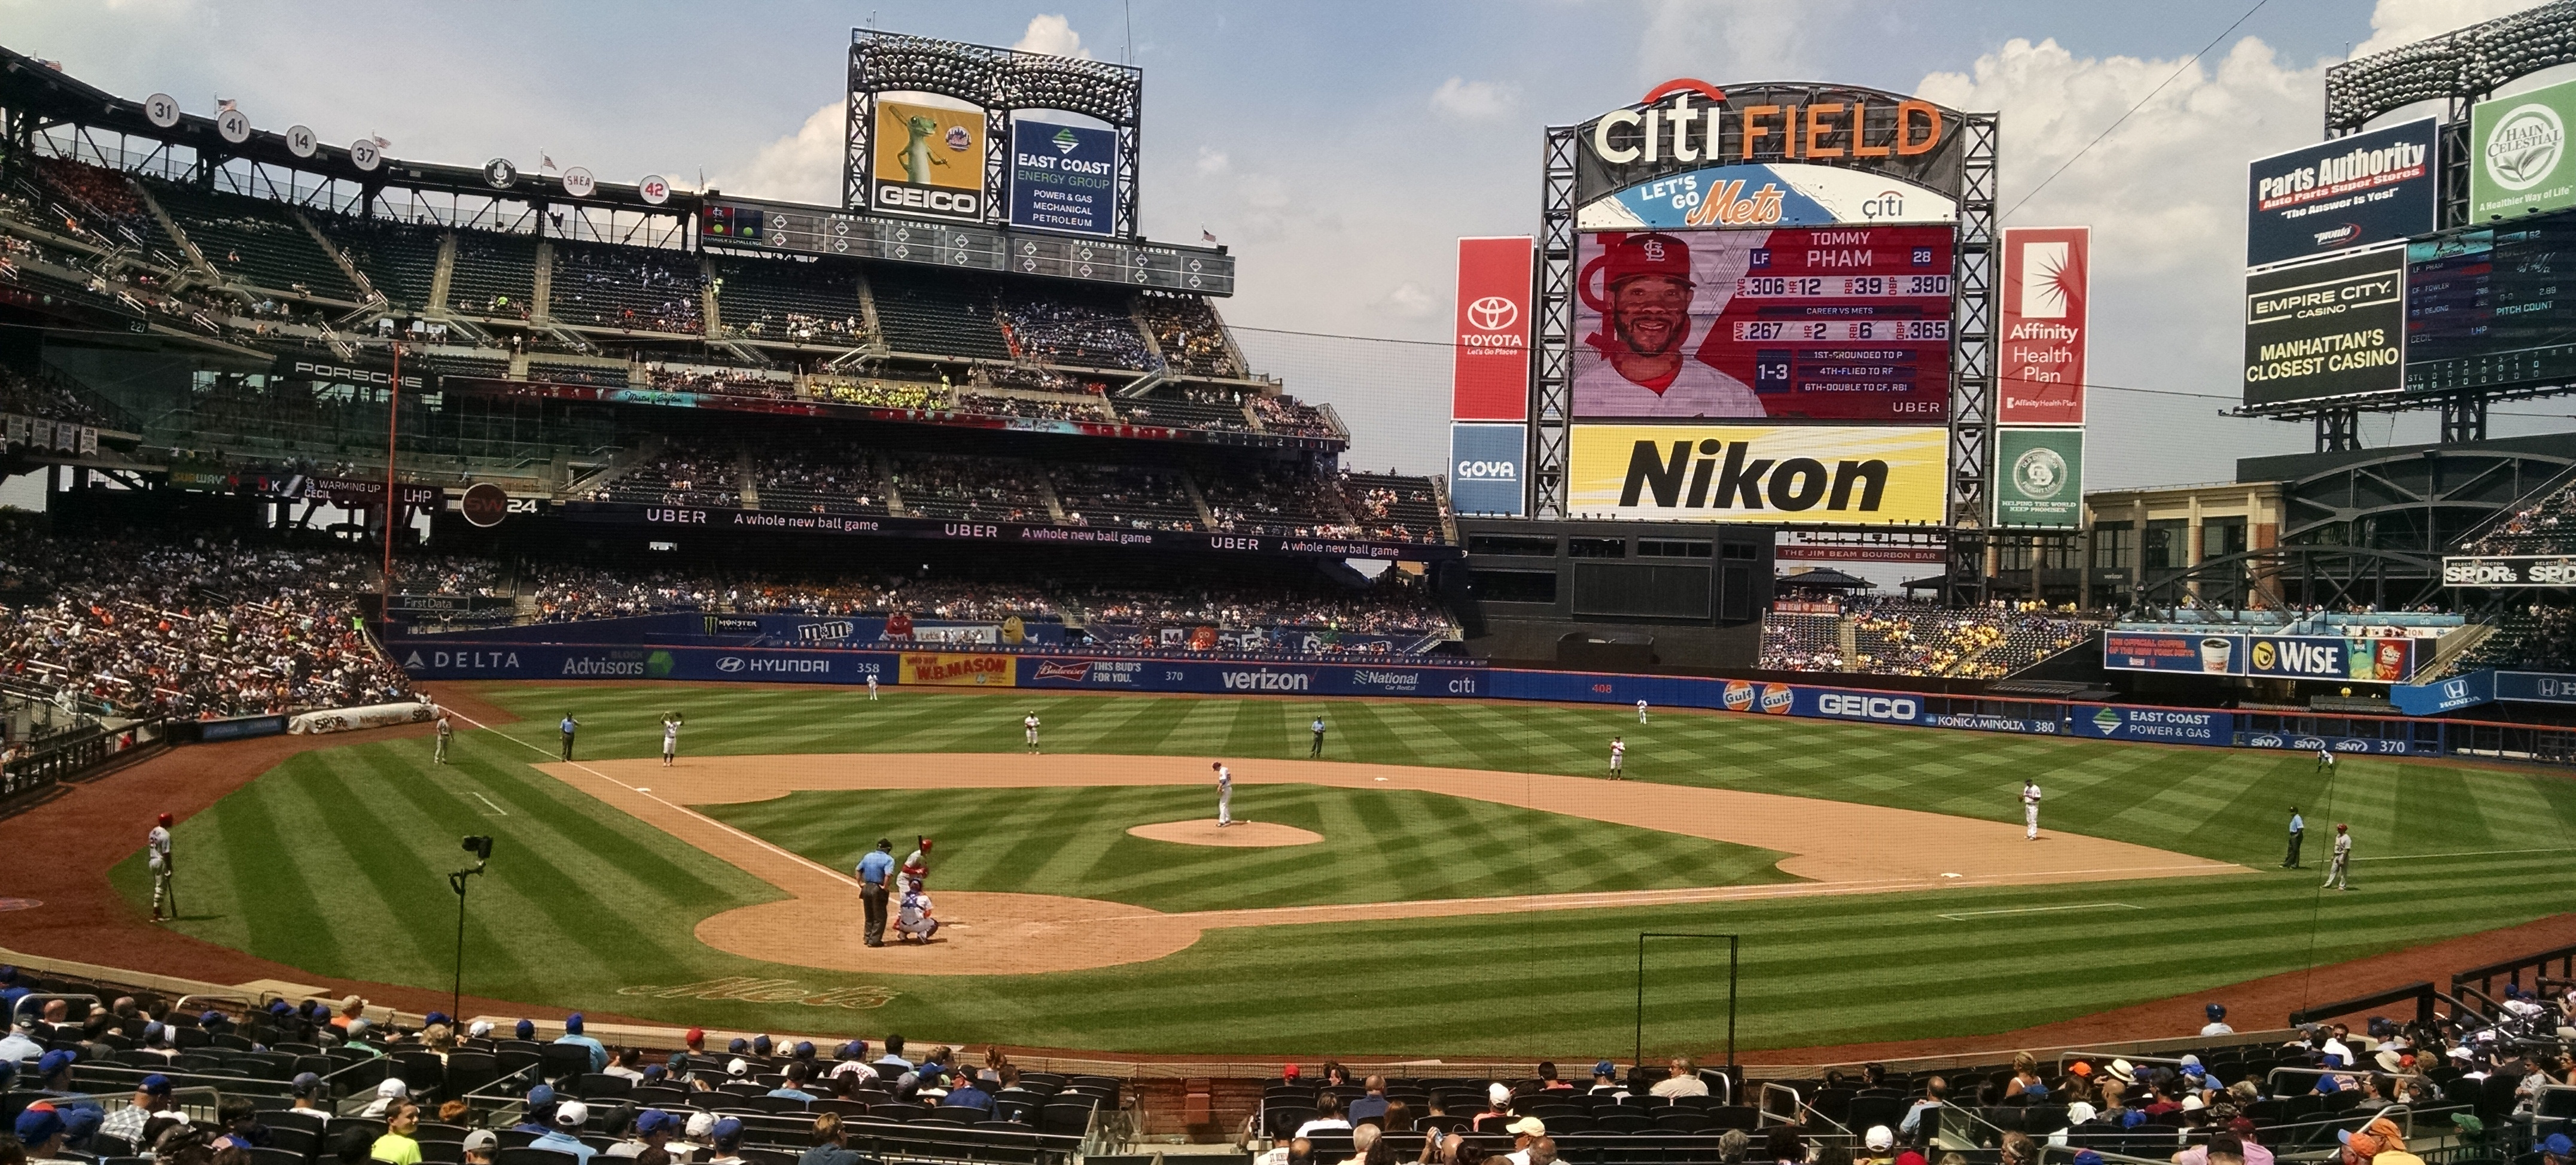 The New York Mets play against the St. Louis Cardinals at Citi Field in New York City on July 20, 2017. (Kenneth Best/UConn Photo)